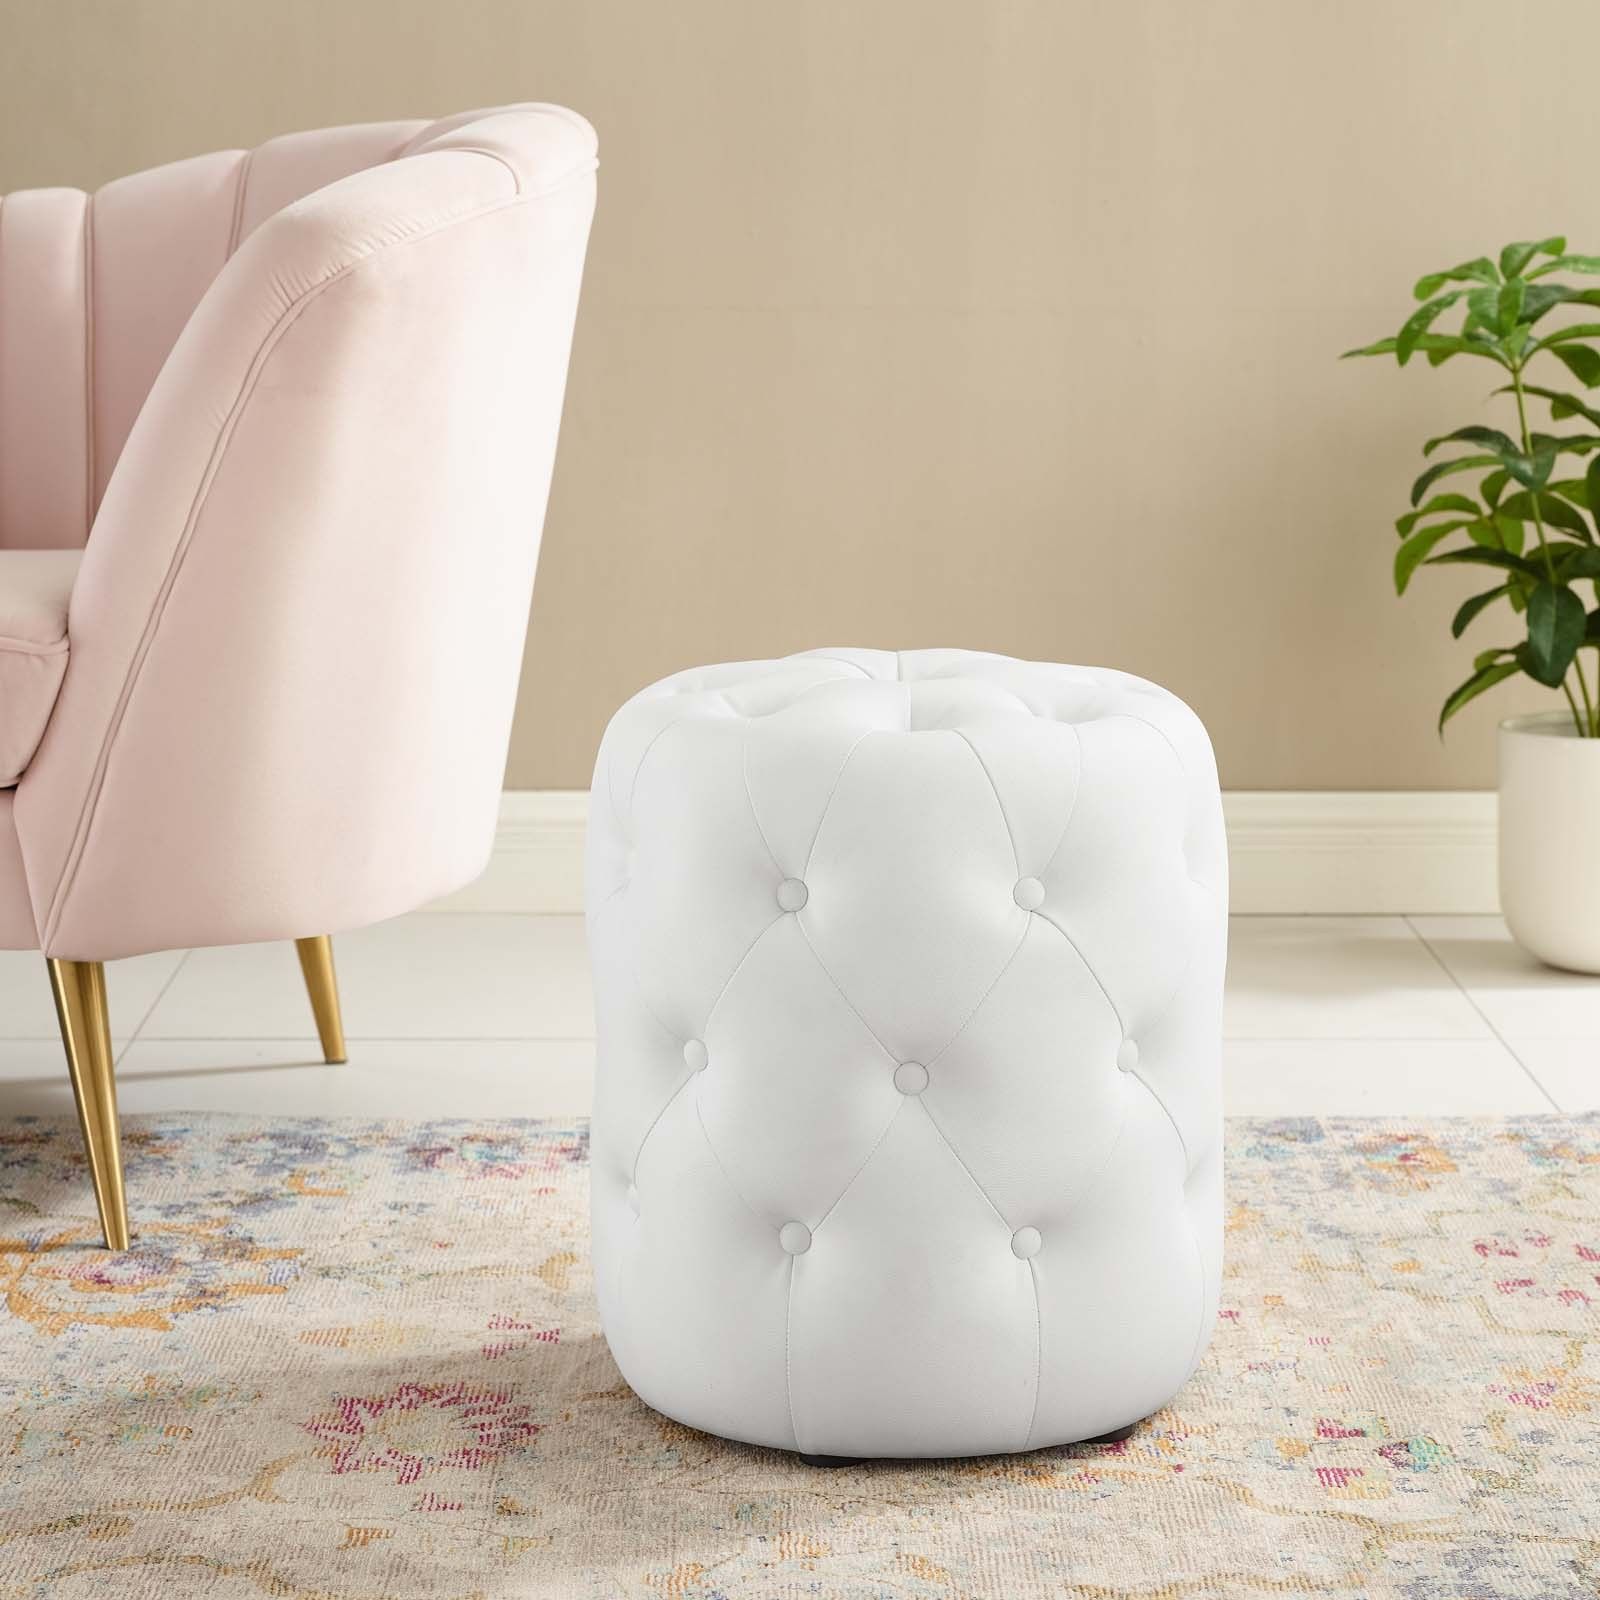 Anthem White Tufted Button Round Faux Leather Ottoman Eei 3777 Whi Regarding Round Blue Faux Leather Ottomans With Pull Tab (View 10 of 20)